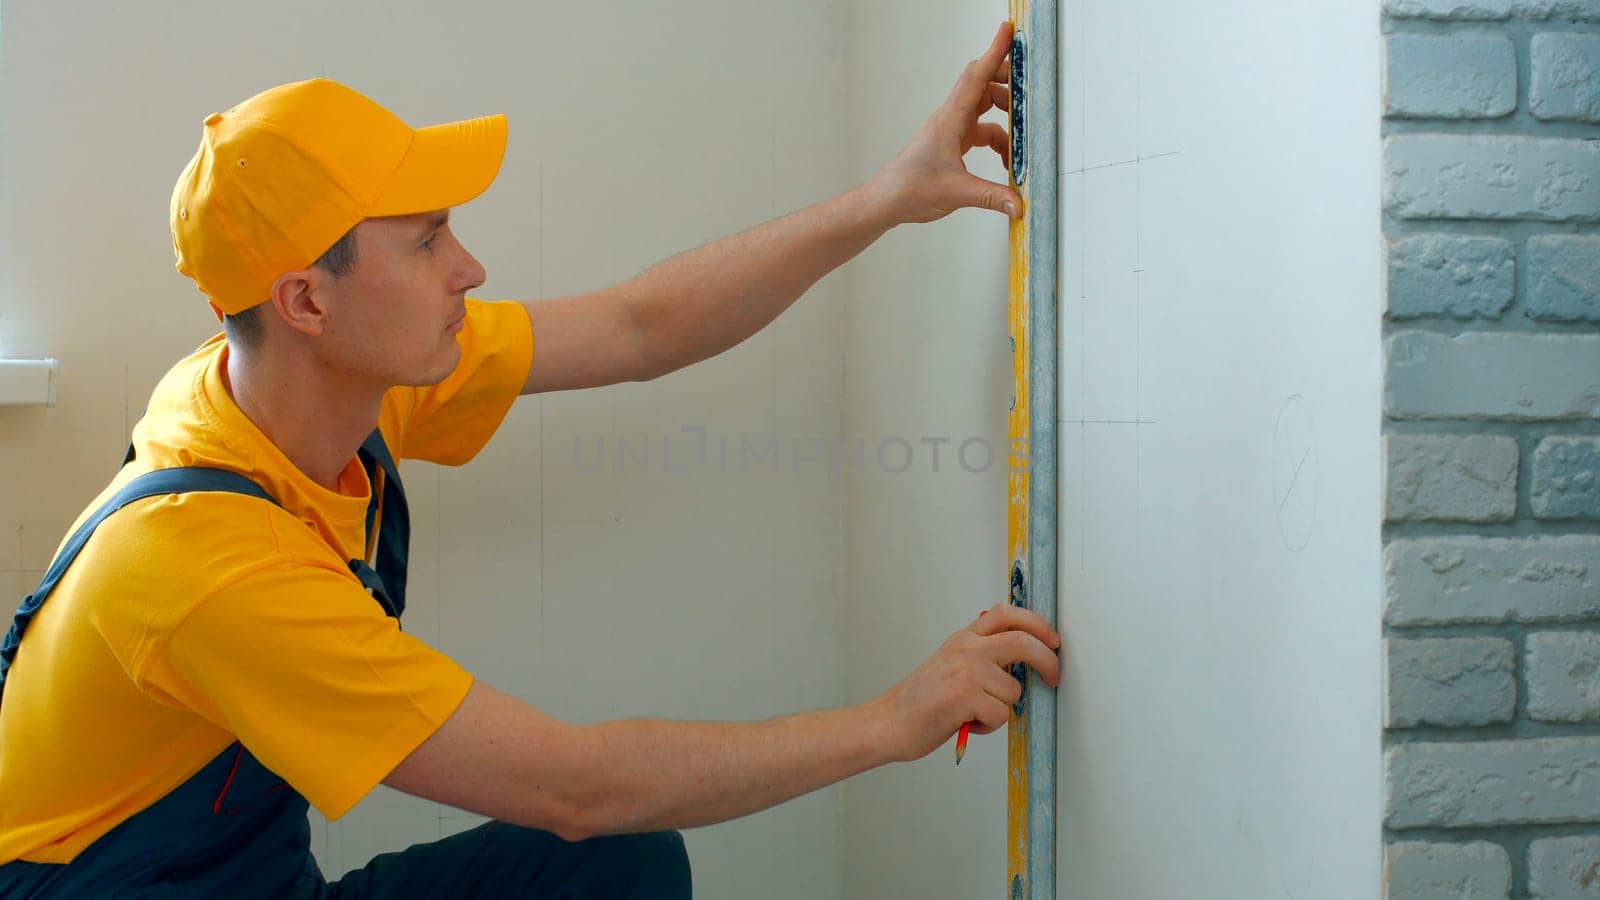 Engineer draws scheme on the wall. Builder making measurements on a white wall.